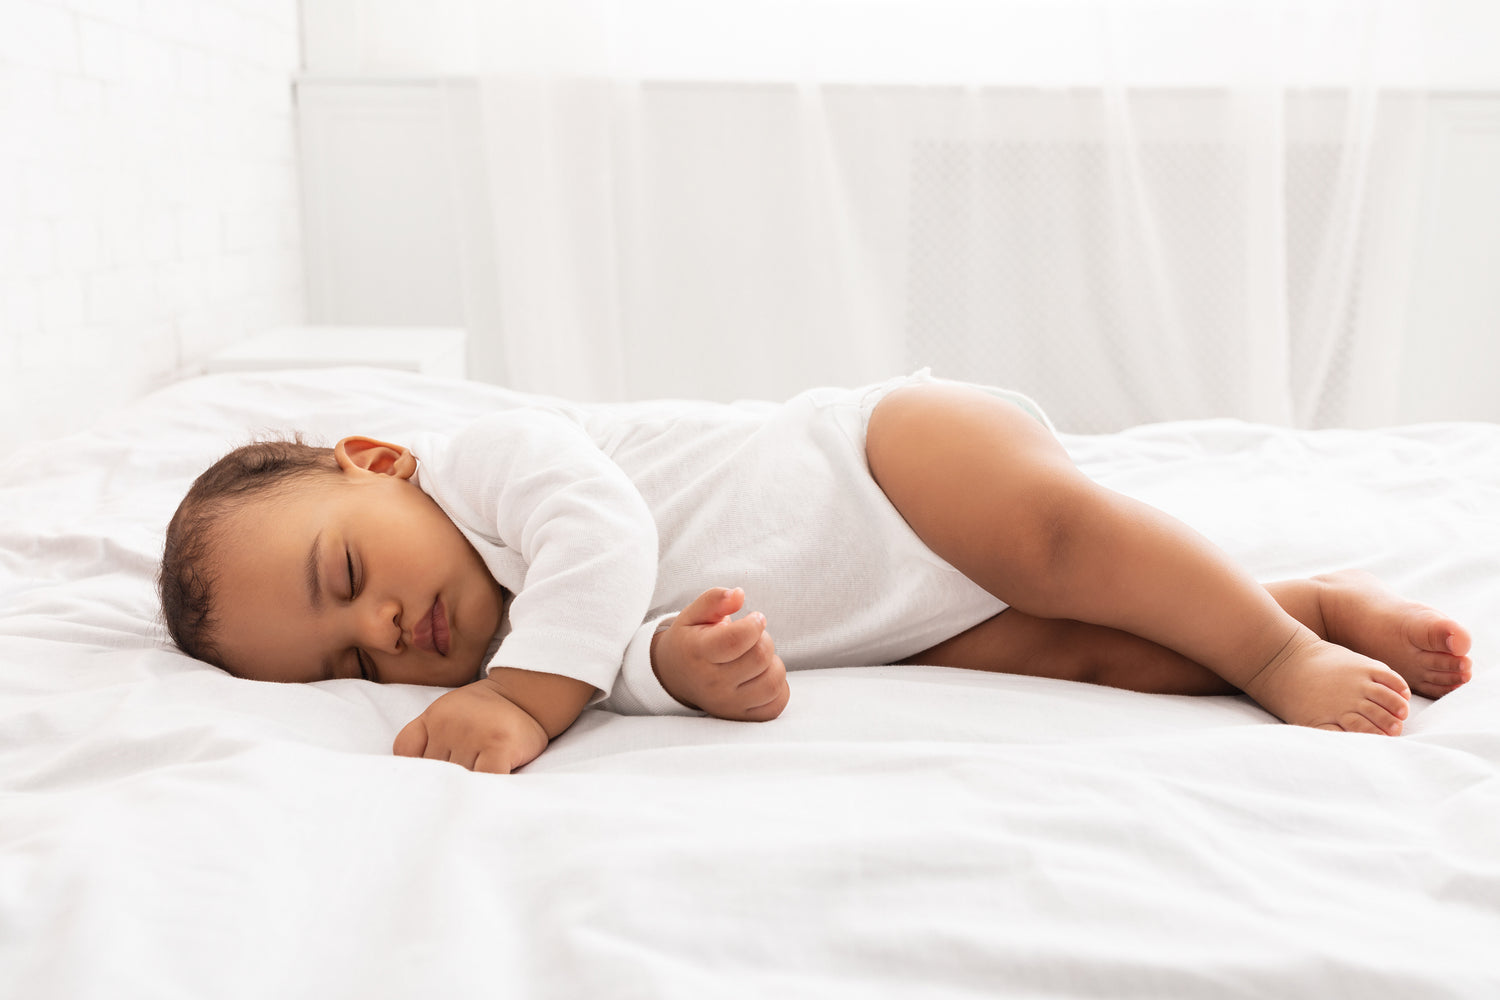 6 Tips For Safe Sleep For Baby